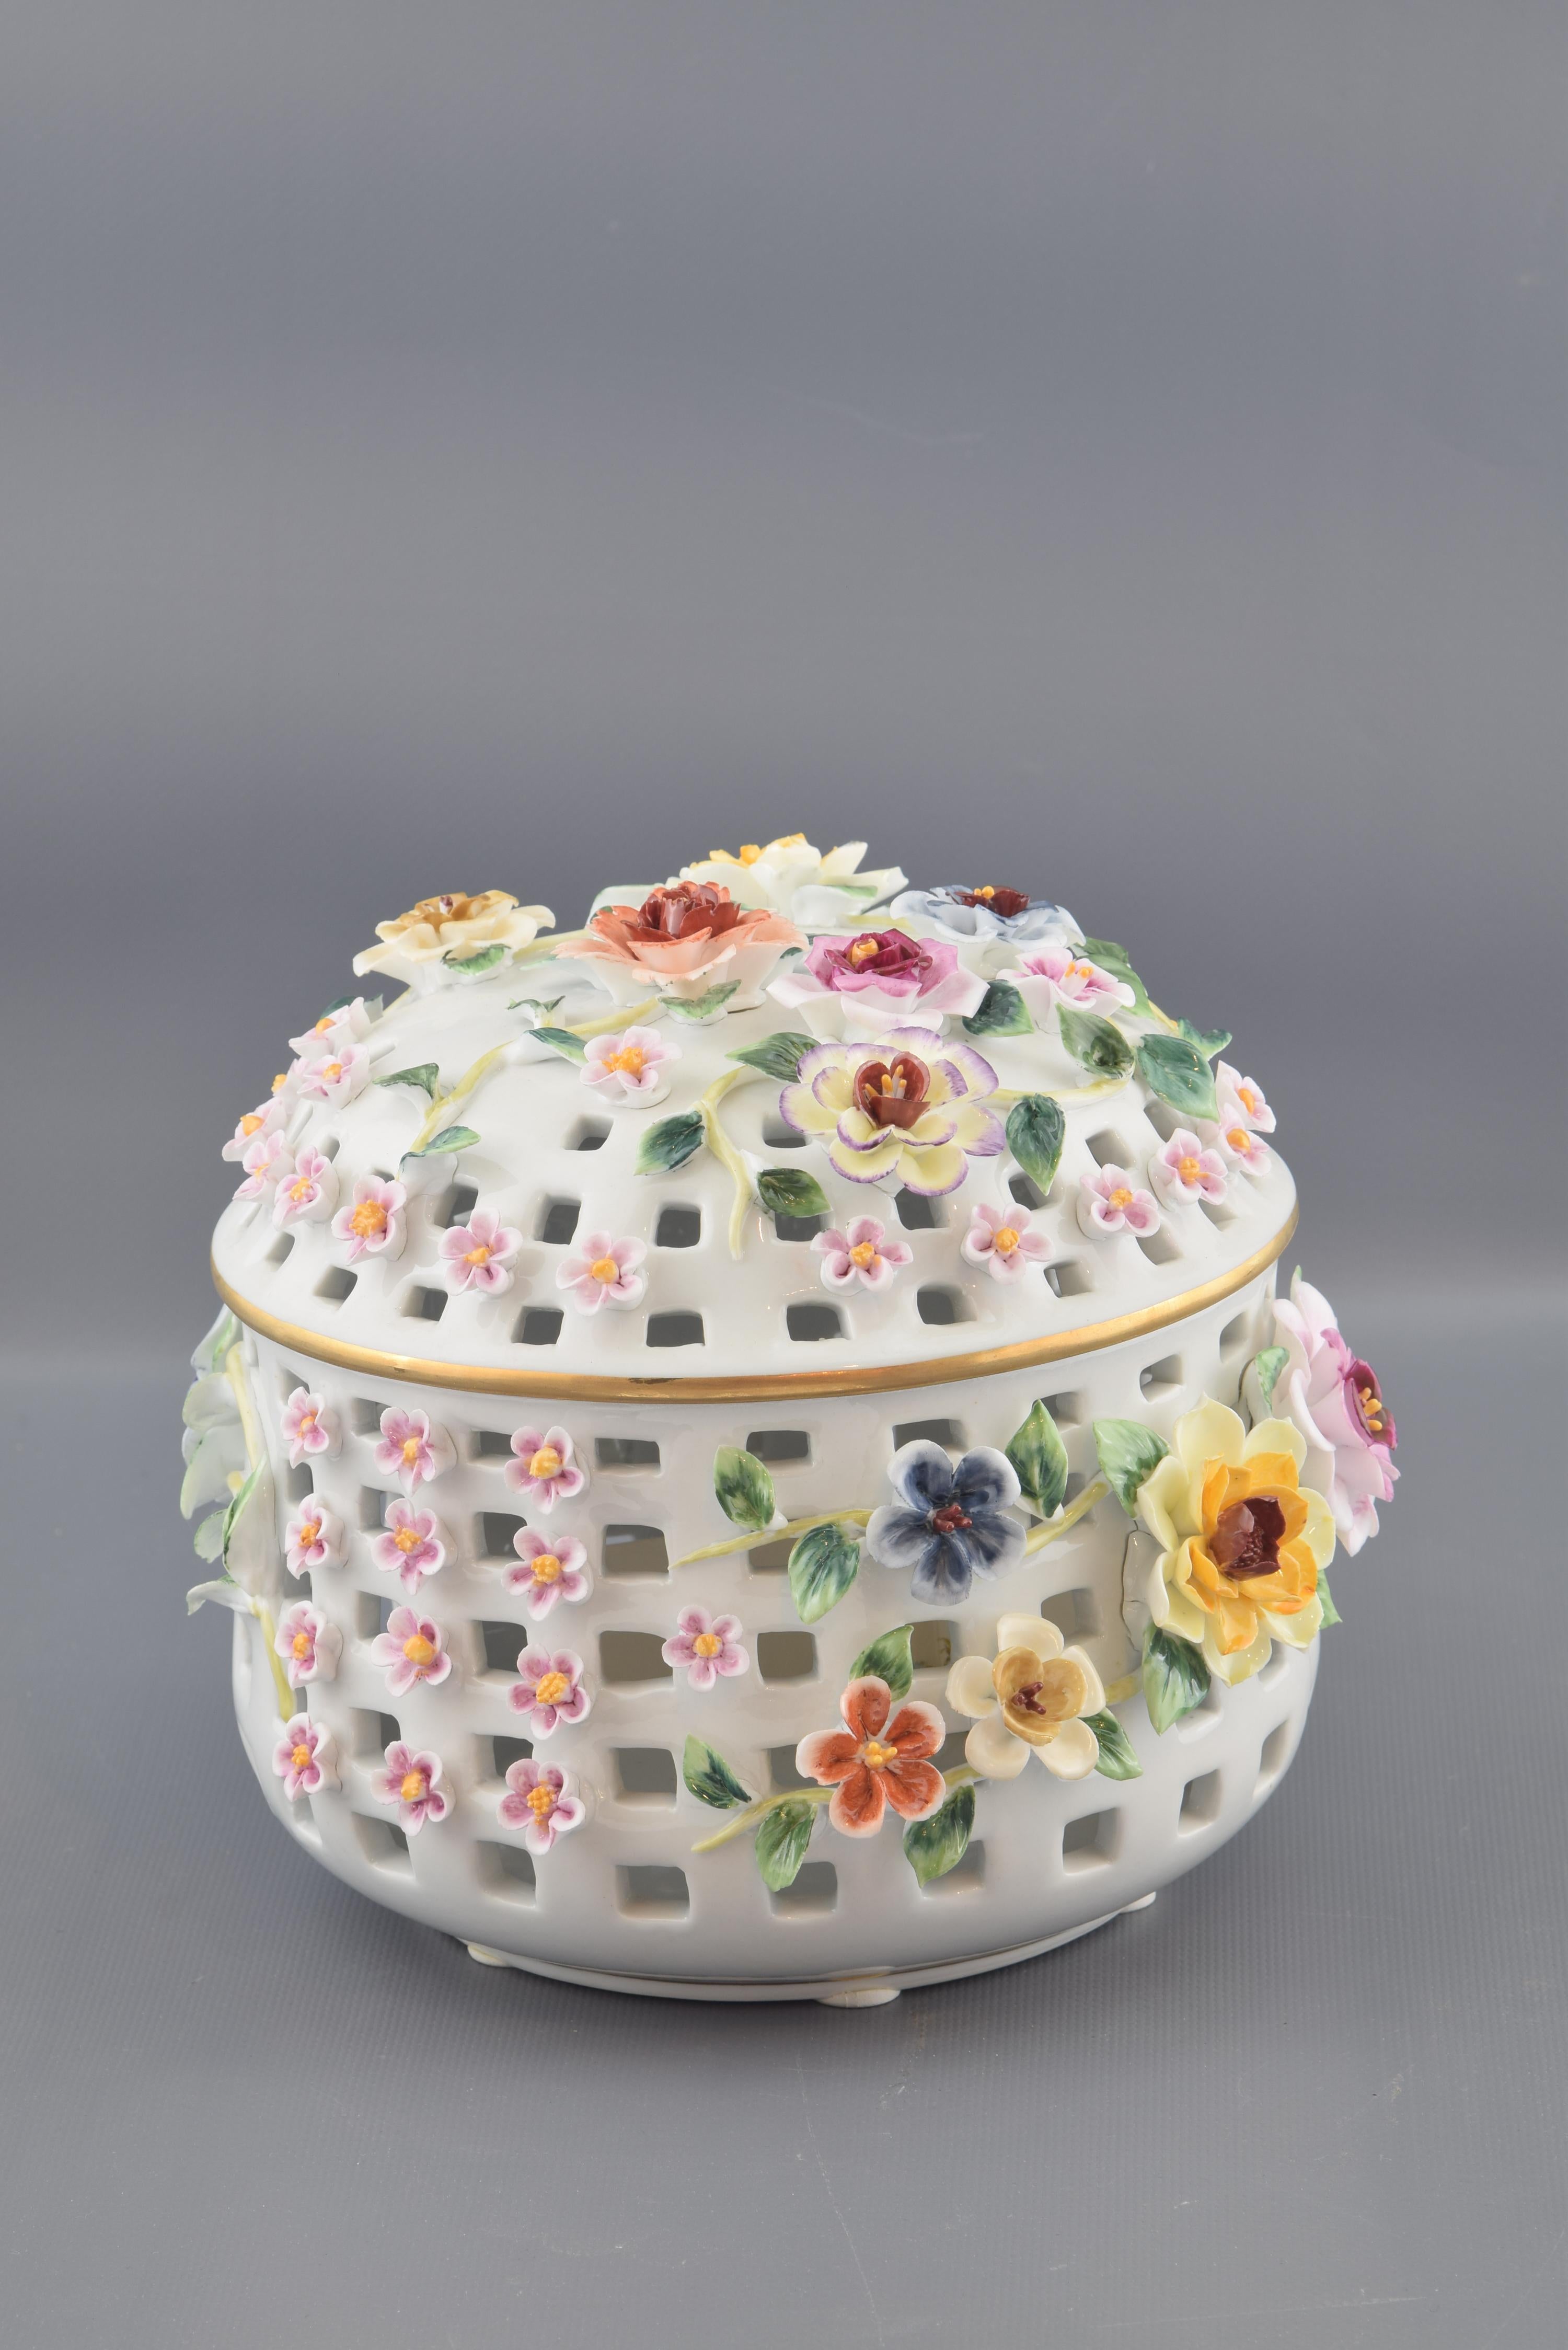 The bonnet with lid is set on almost all its surface, and is adorned with roses, stems and small flowers of different colors on the openwork surface. This type of porcelain was very popular in Europe since the 18th century, with models similar to